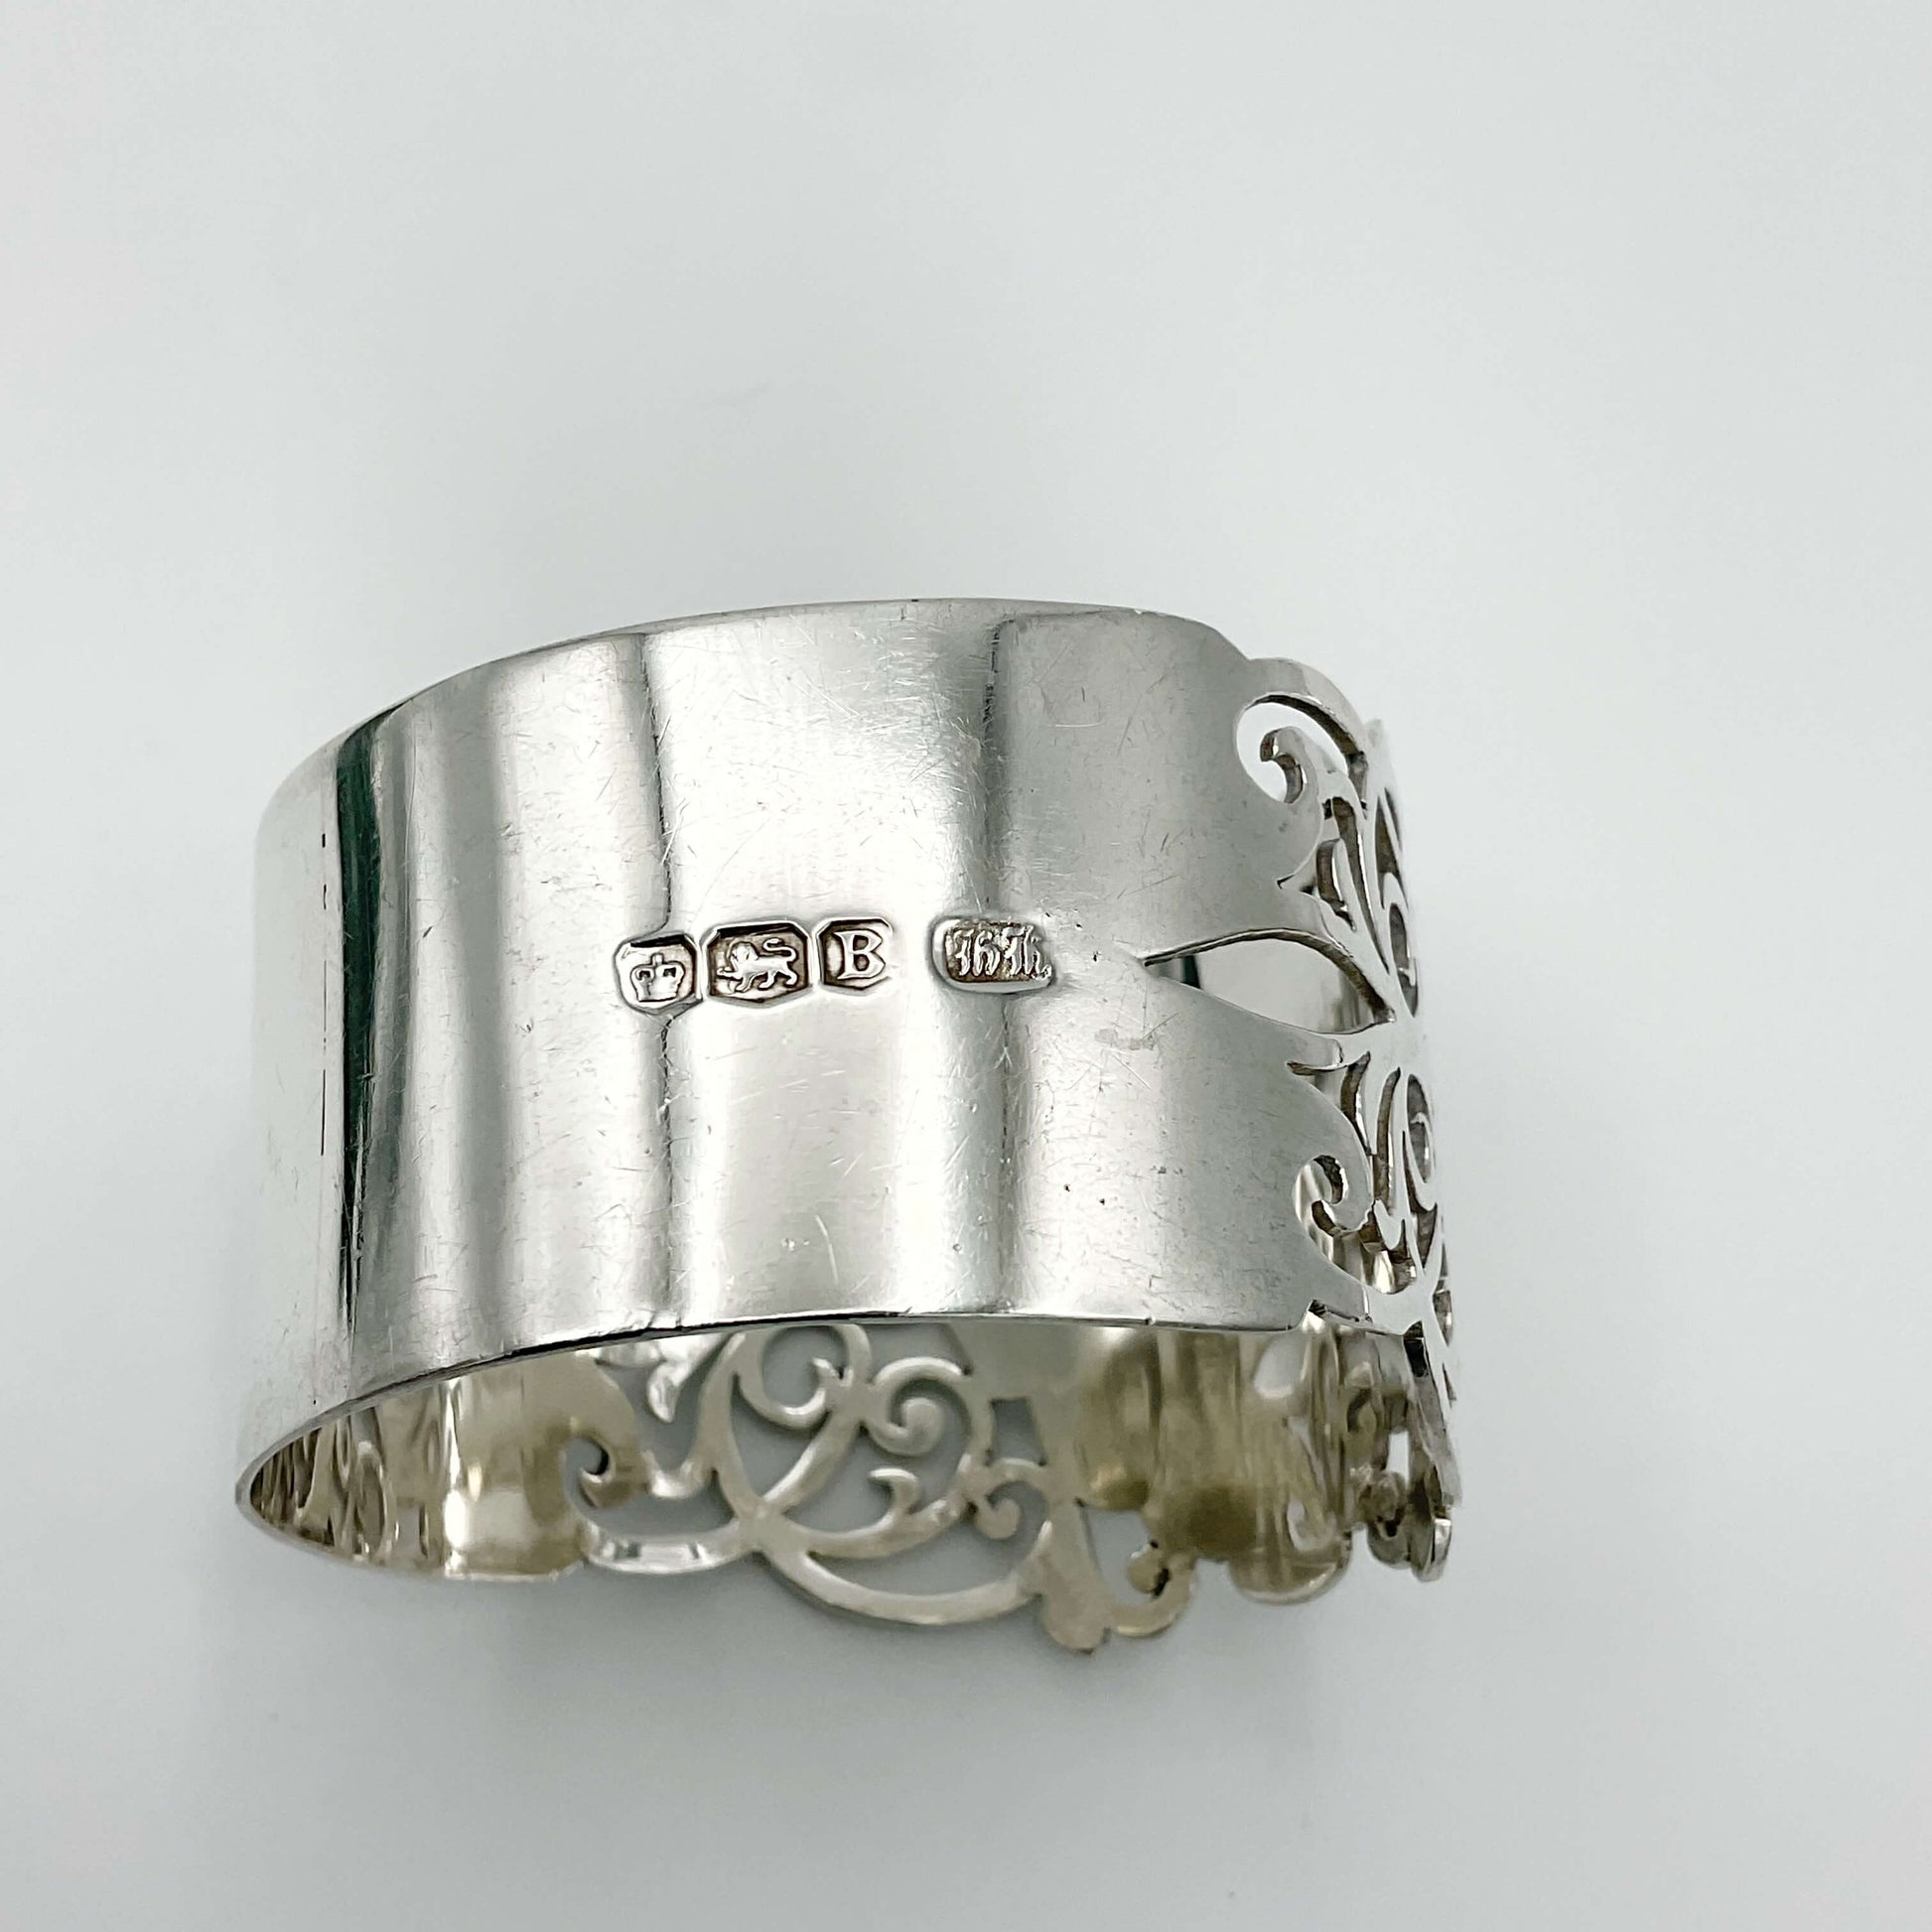 Shiny napkin ring with elaborate sides and hallmarks on a plain background 